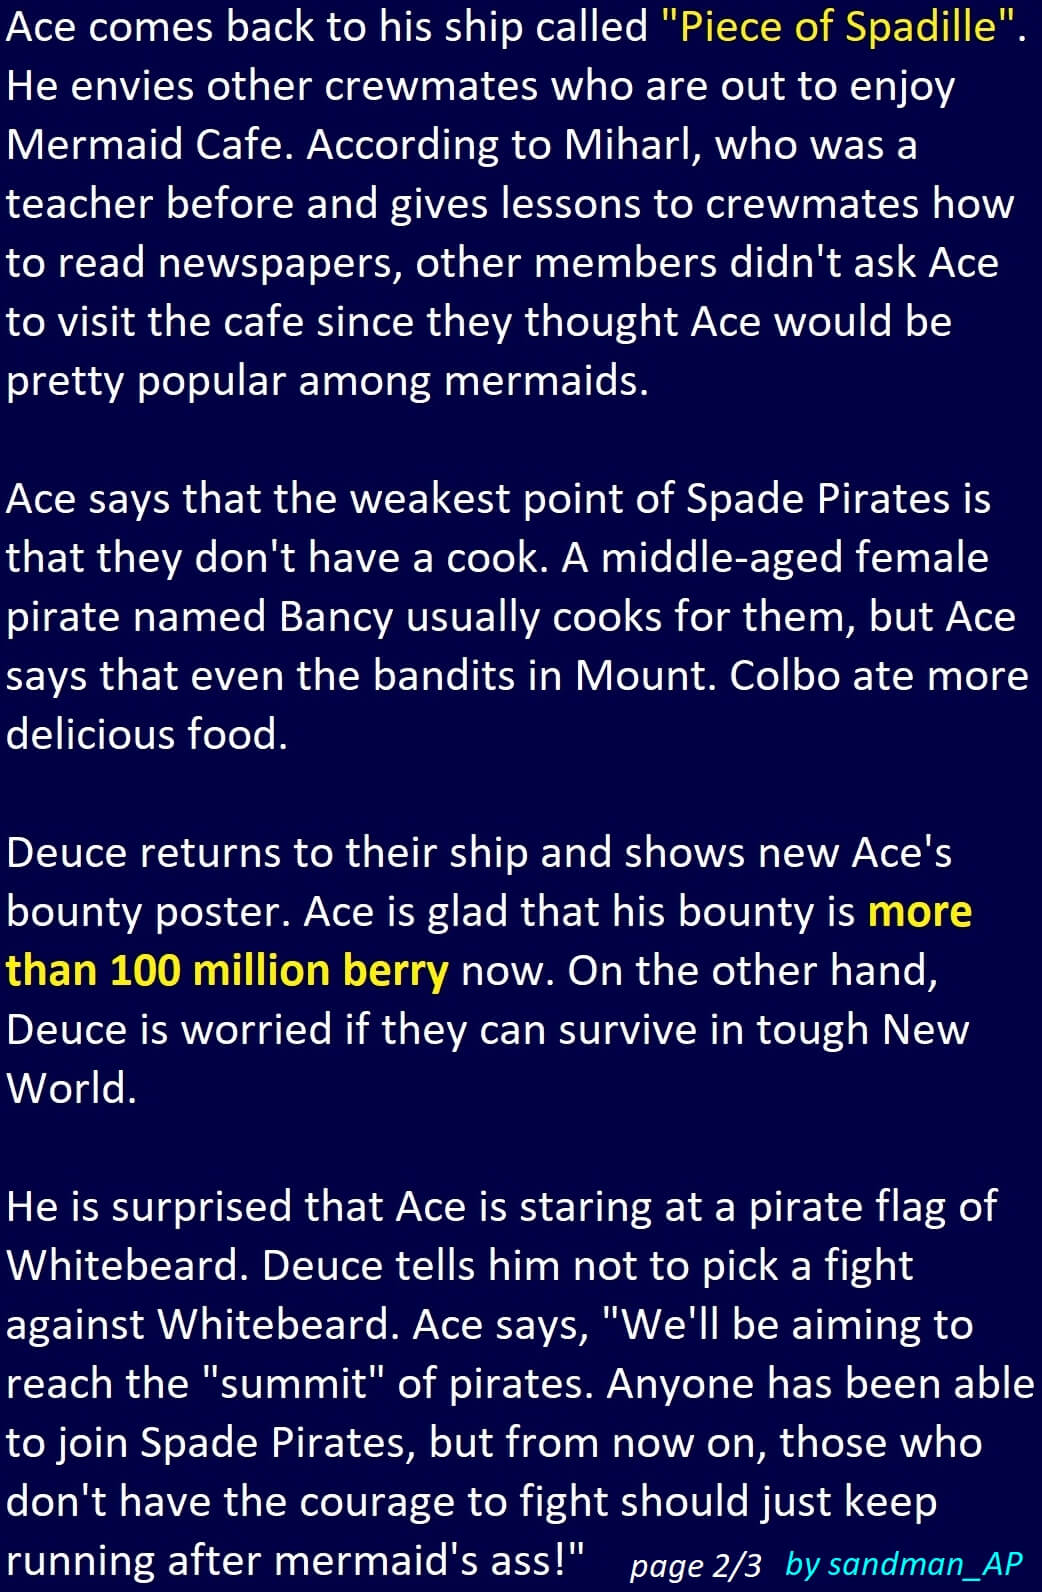 Sandman One Piece Novel Ace Volume 2 Was Released Yesterday The Novel Is Divided Into 7 Parts Prologue And Chapter 1 6 Here Are My Summaries For Prologue And Chapter 1